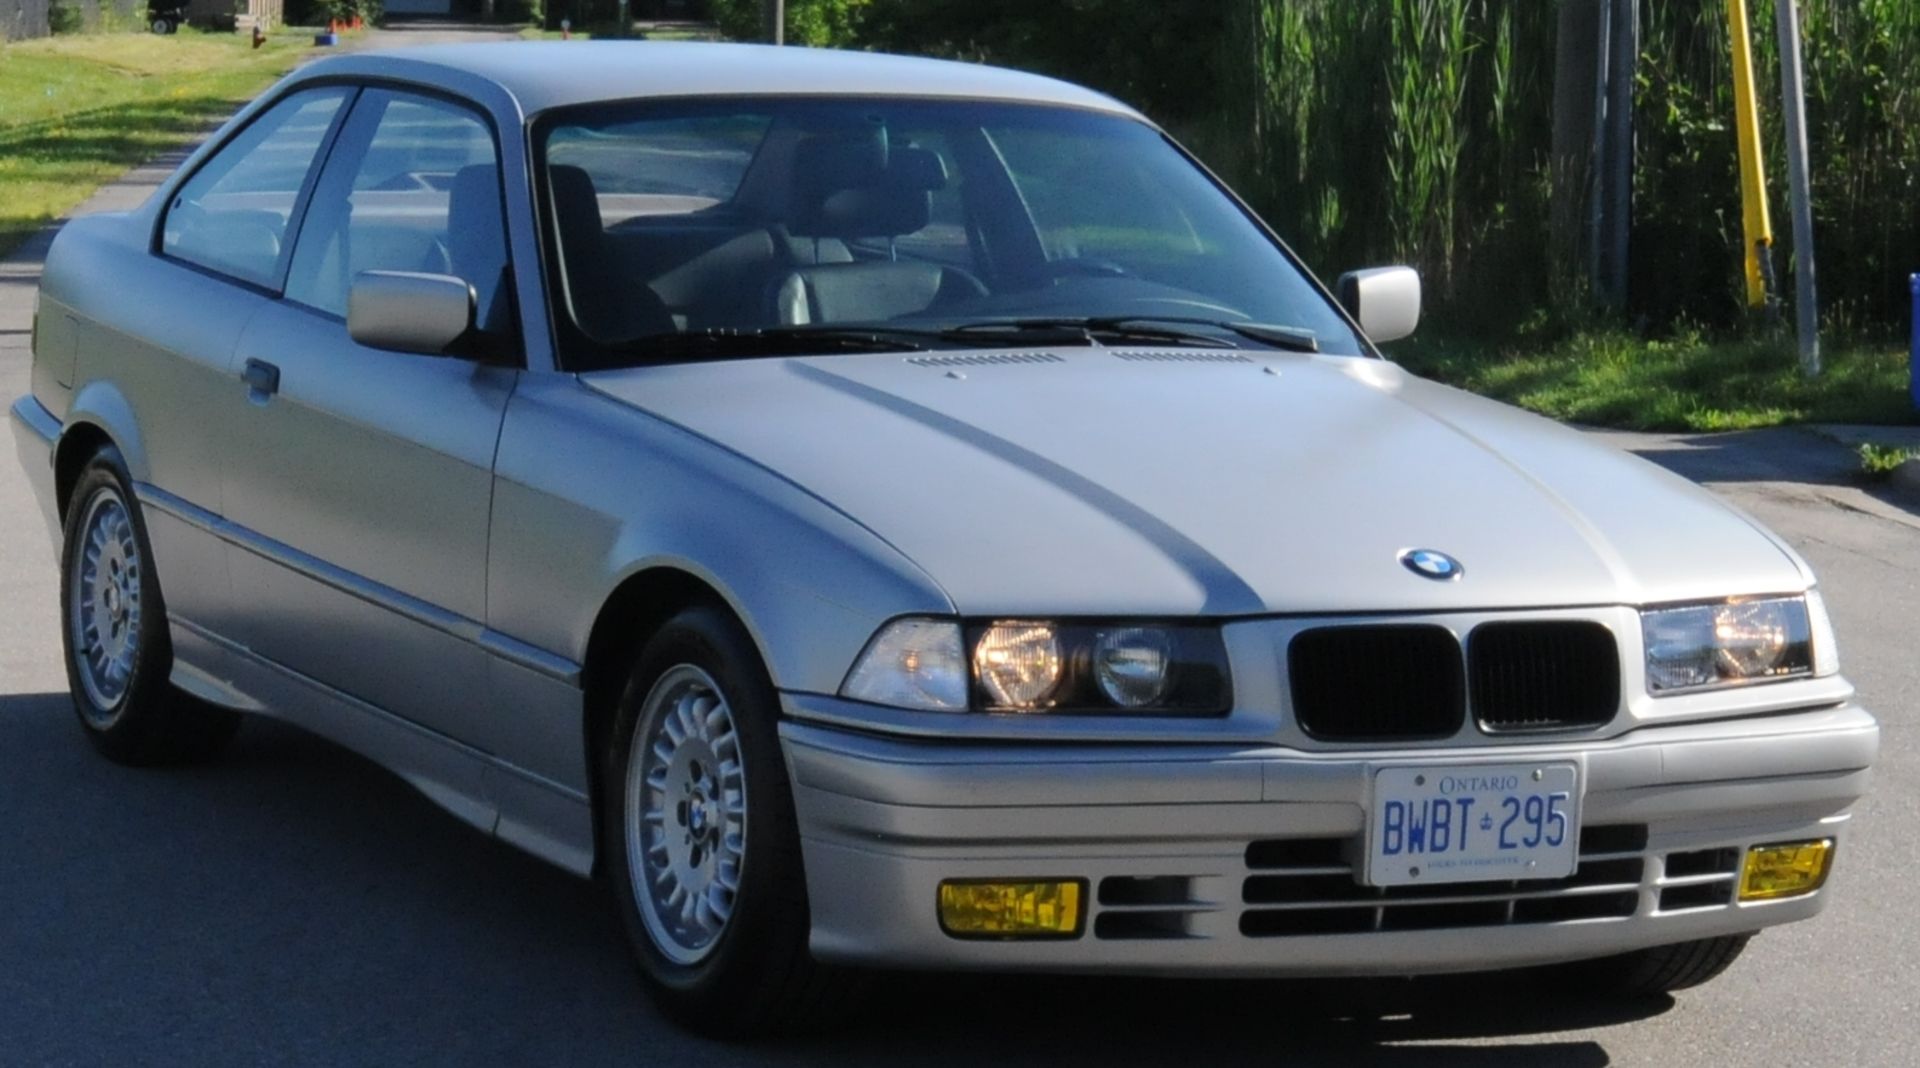 BMW (1993) E36 316IS COUPE WITH 1.8L VANOS VVT ENGINE, 5 SPEED MANUAL TRANSMISSION, REAR WHEEL - Bild 2 aus 5